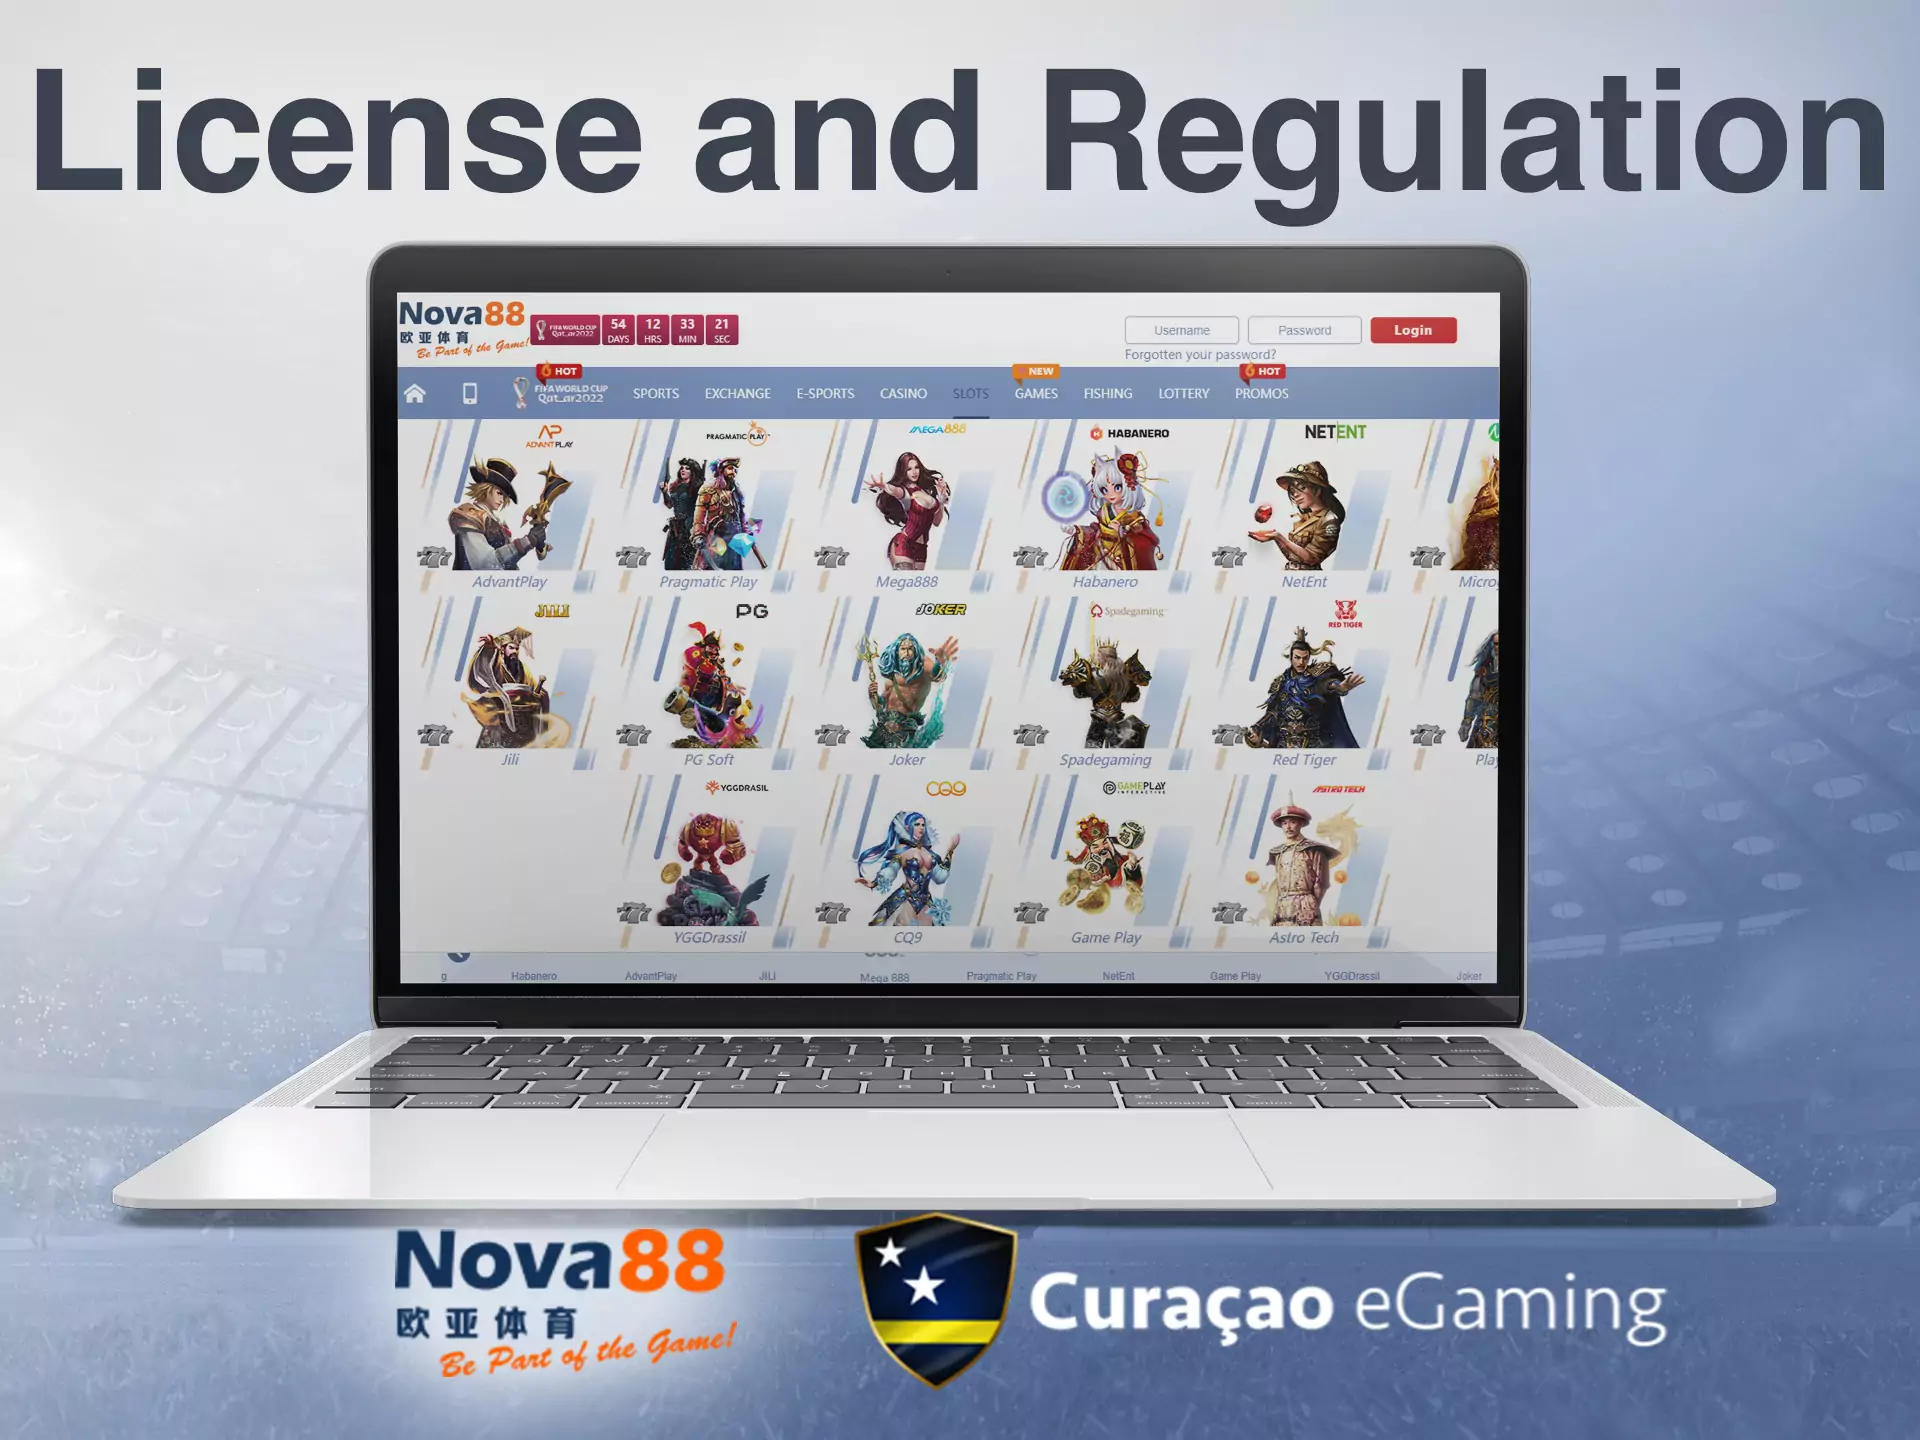 Nova88 works legally online since it has the Curacao Egaming license.